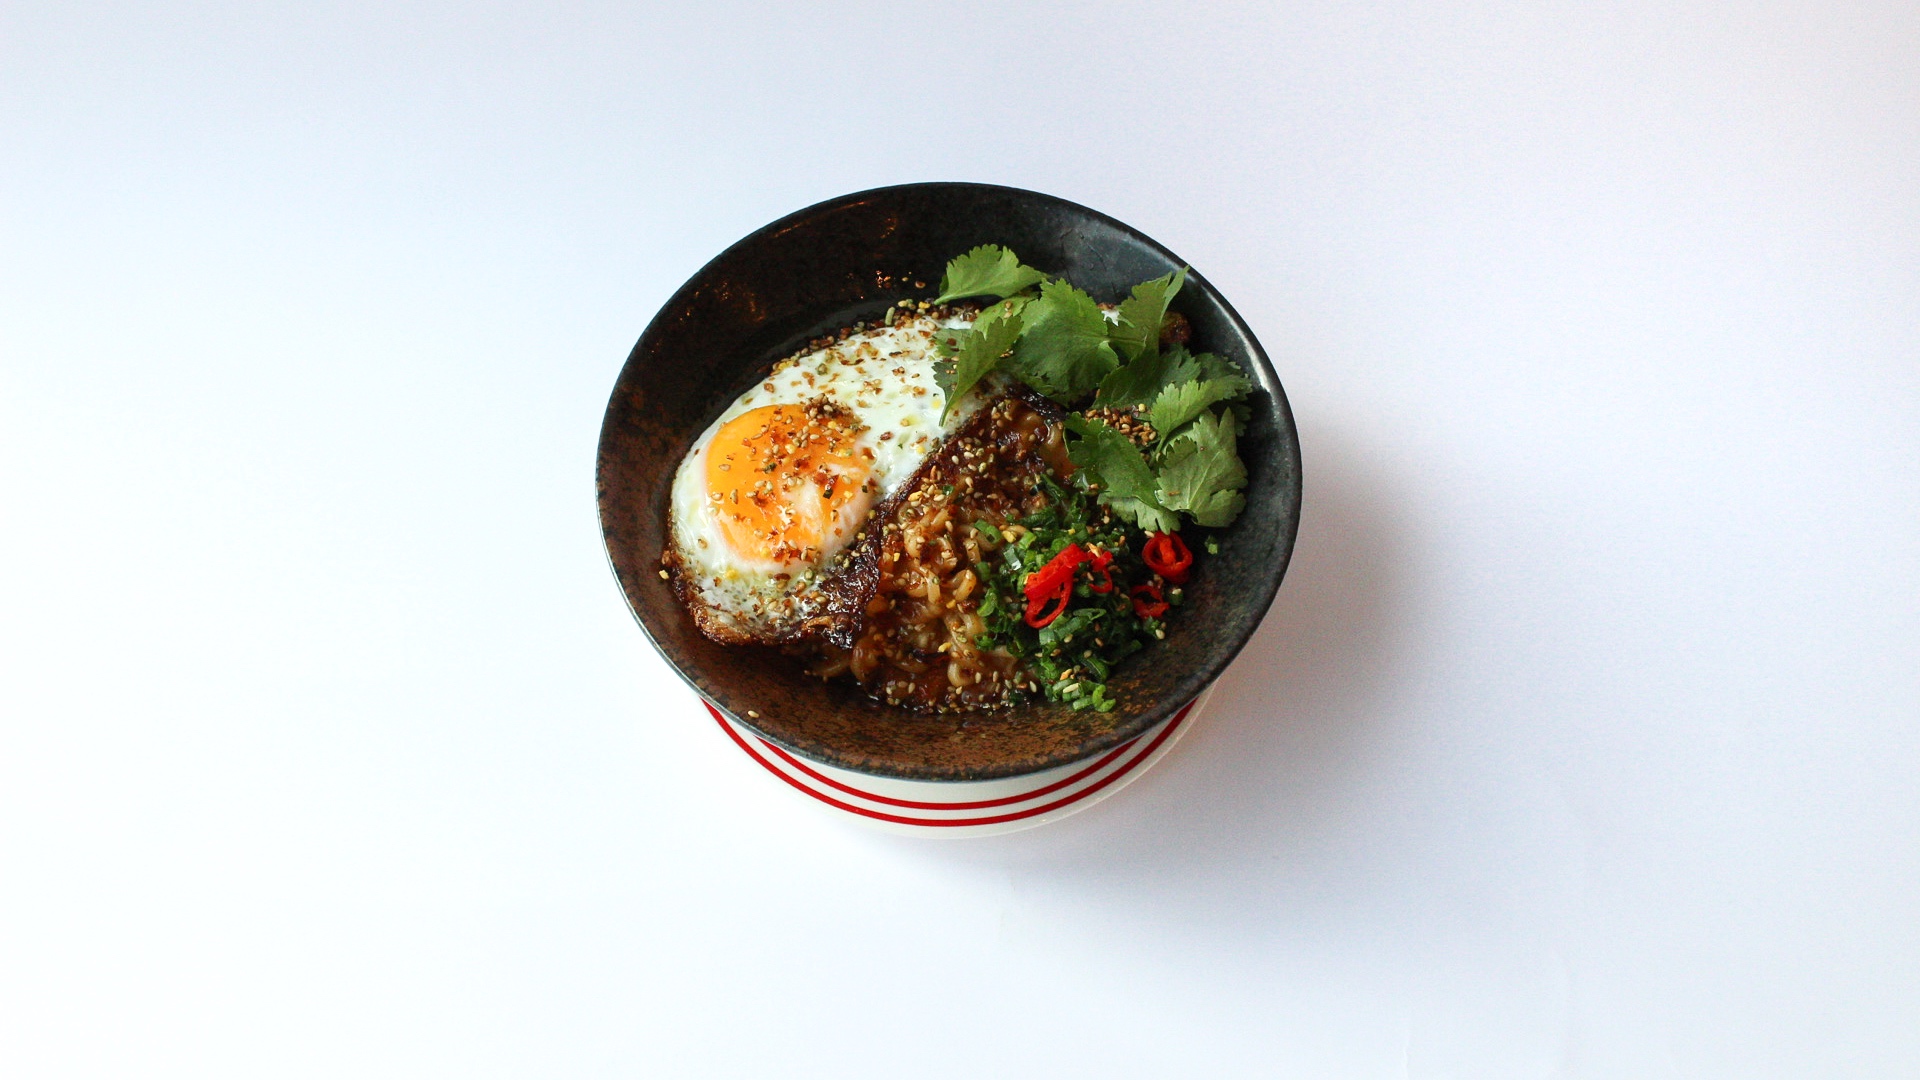 Spicy noodles with fried egg